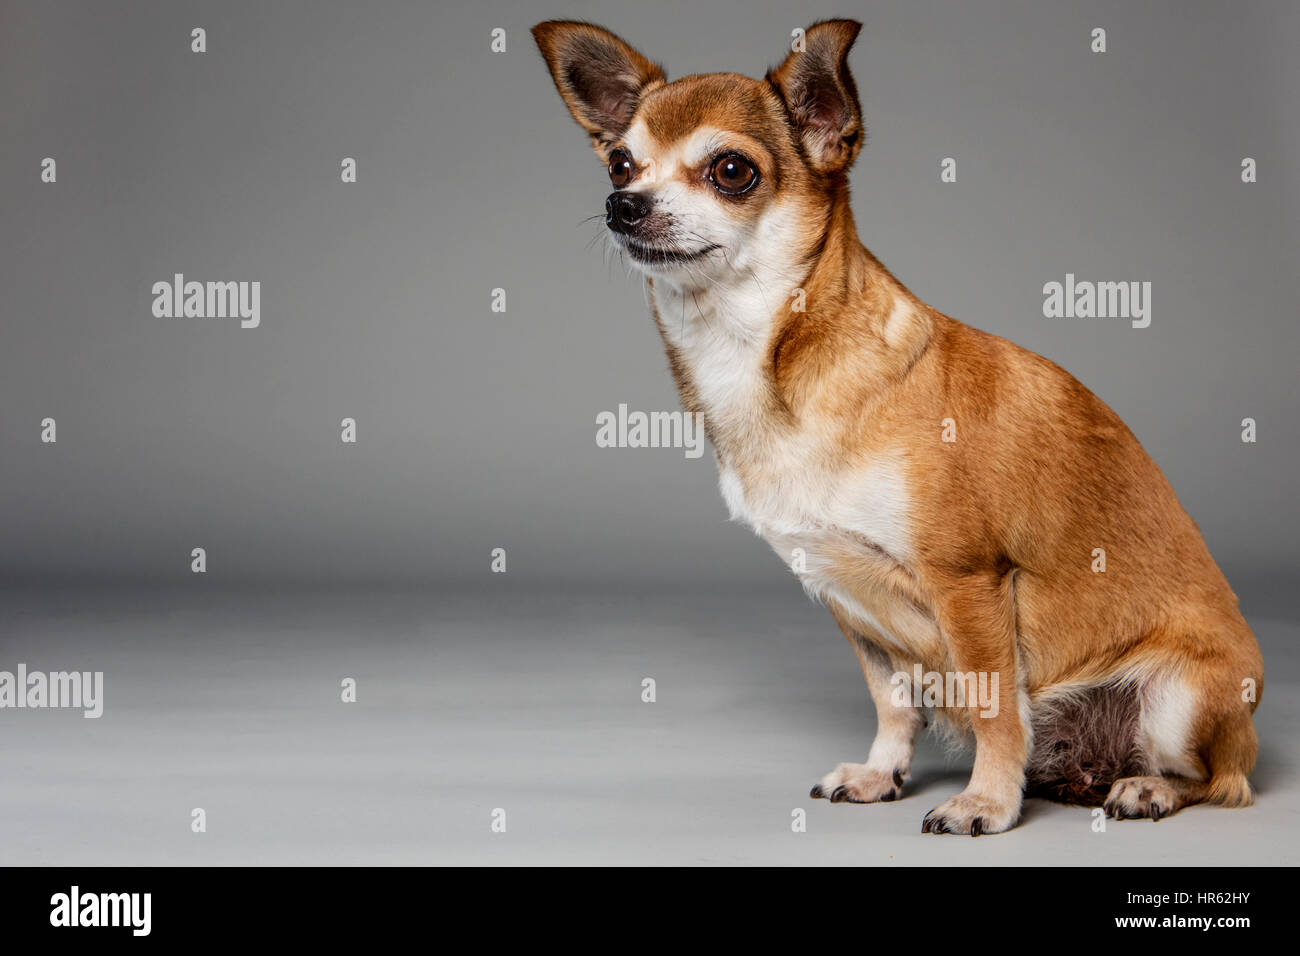 Portrait of a awn-colored chihuahua sitting on neutral studio background, looking off-camera. Stock Photo